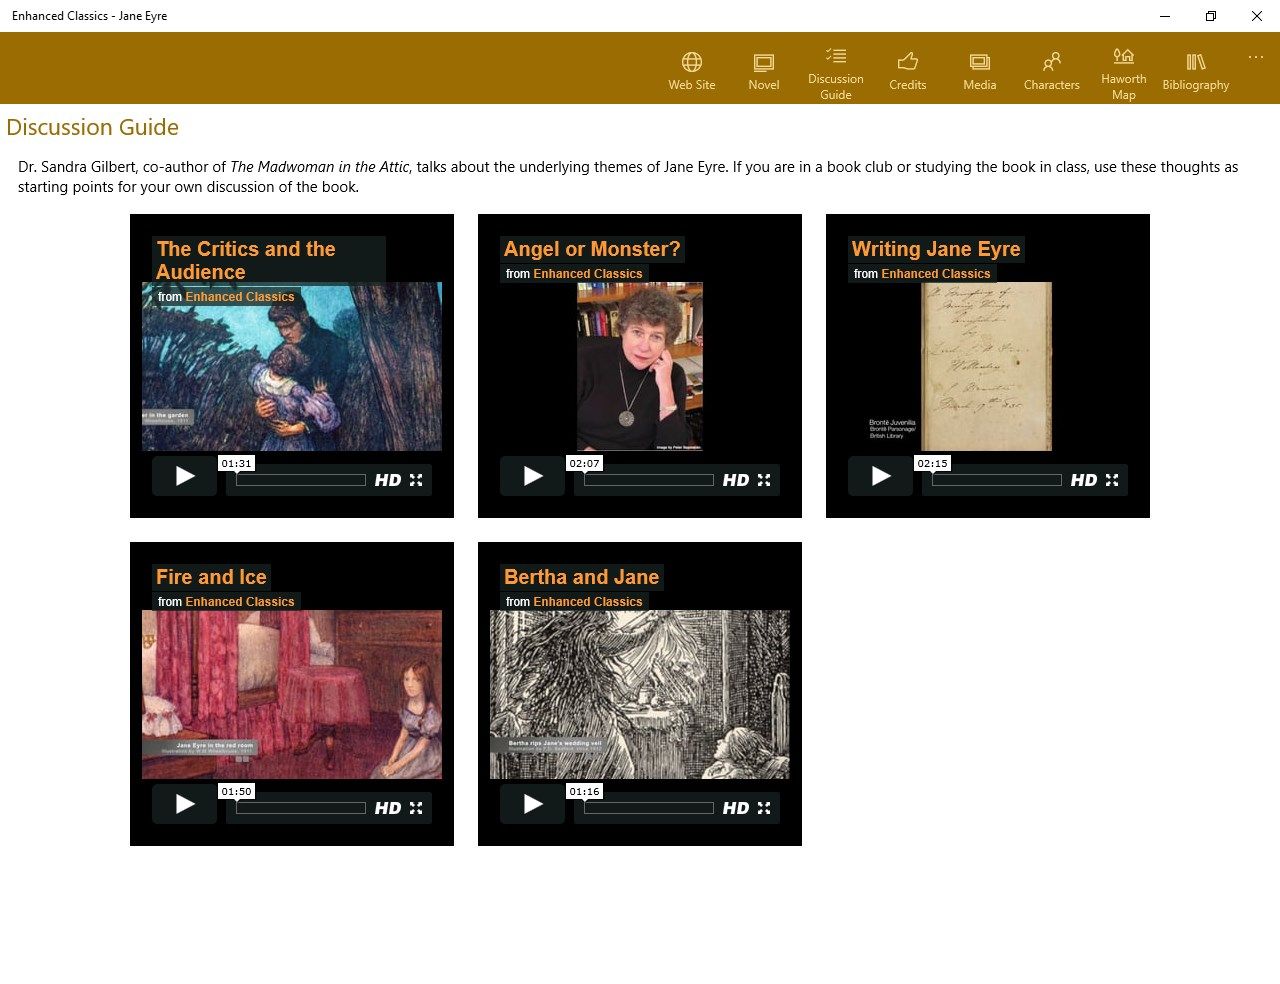 A discussion guide includes video interviews with Bronte scholars